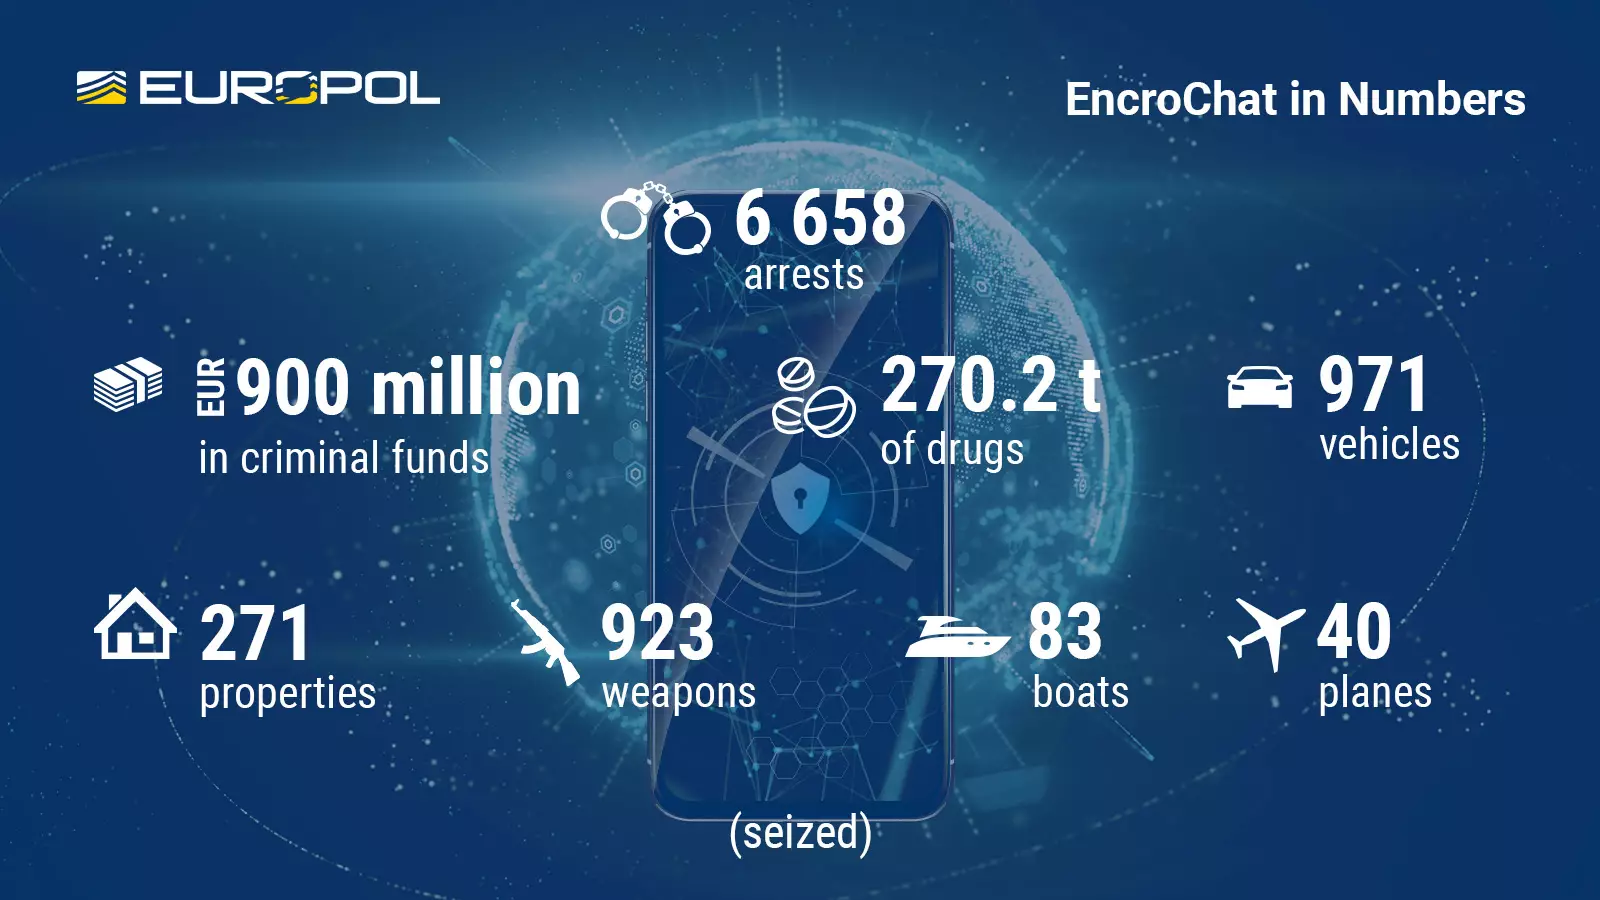 Cracking of Encrochat crypto phones: Shockwave from Europol